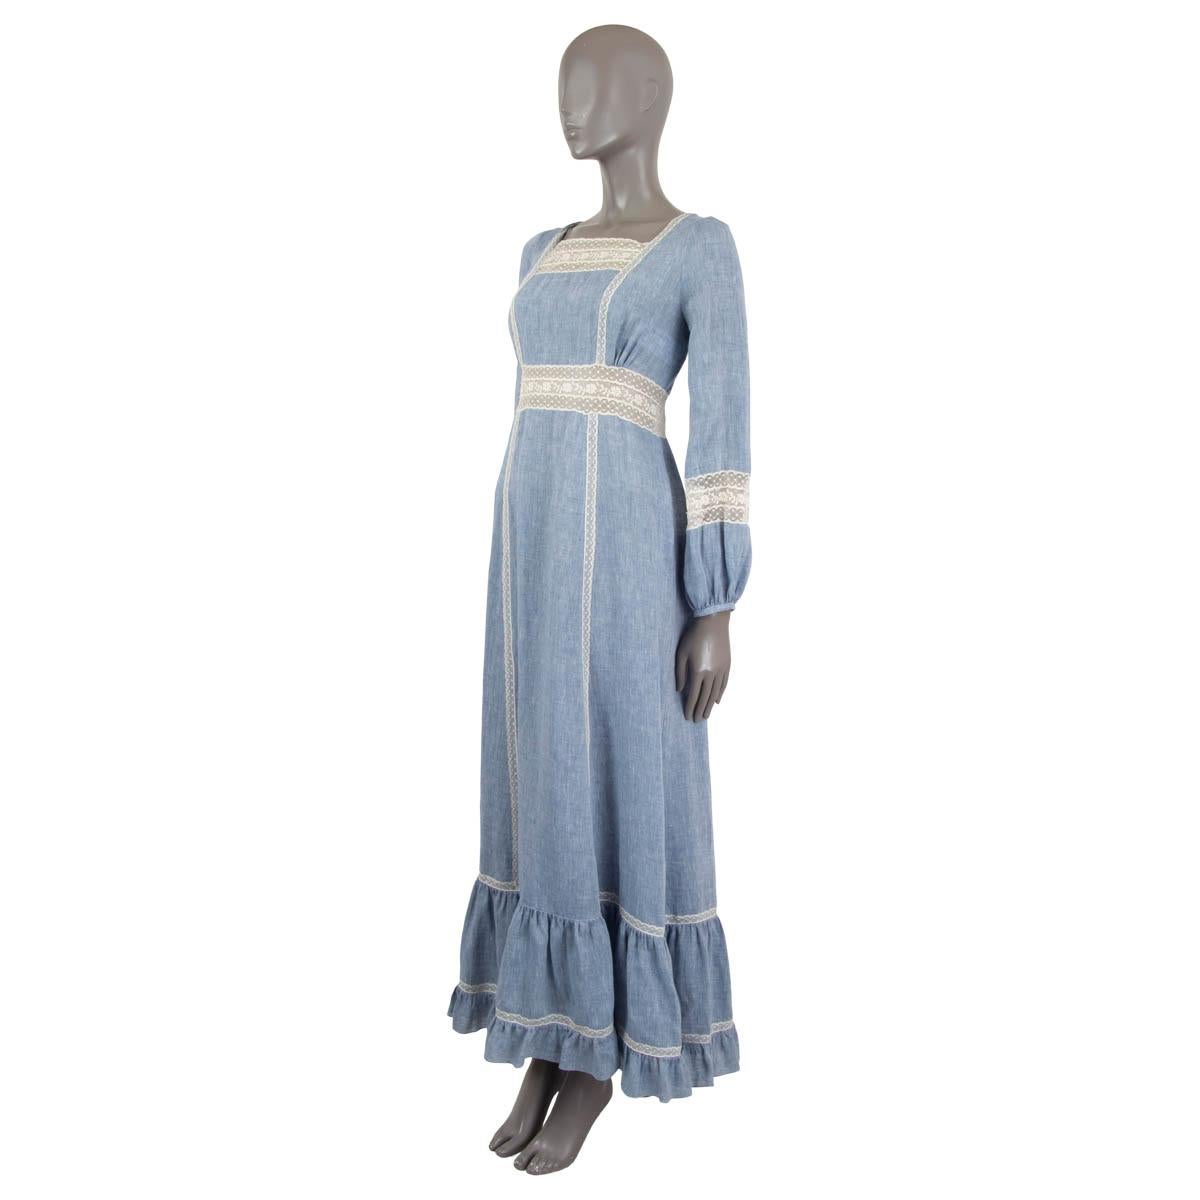 100% authentic Christian Dior prairie maxi dress in light blue linen (100%) with ivory Chambray lace trim in cotton (95%) and nylon (5%). The design features a square neck with lace insert and an open back with lace-up detail. Opens with a zipper on